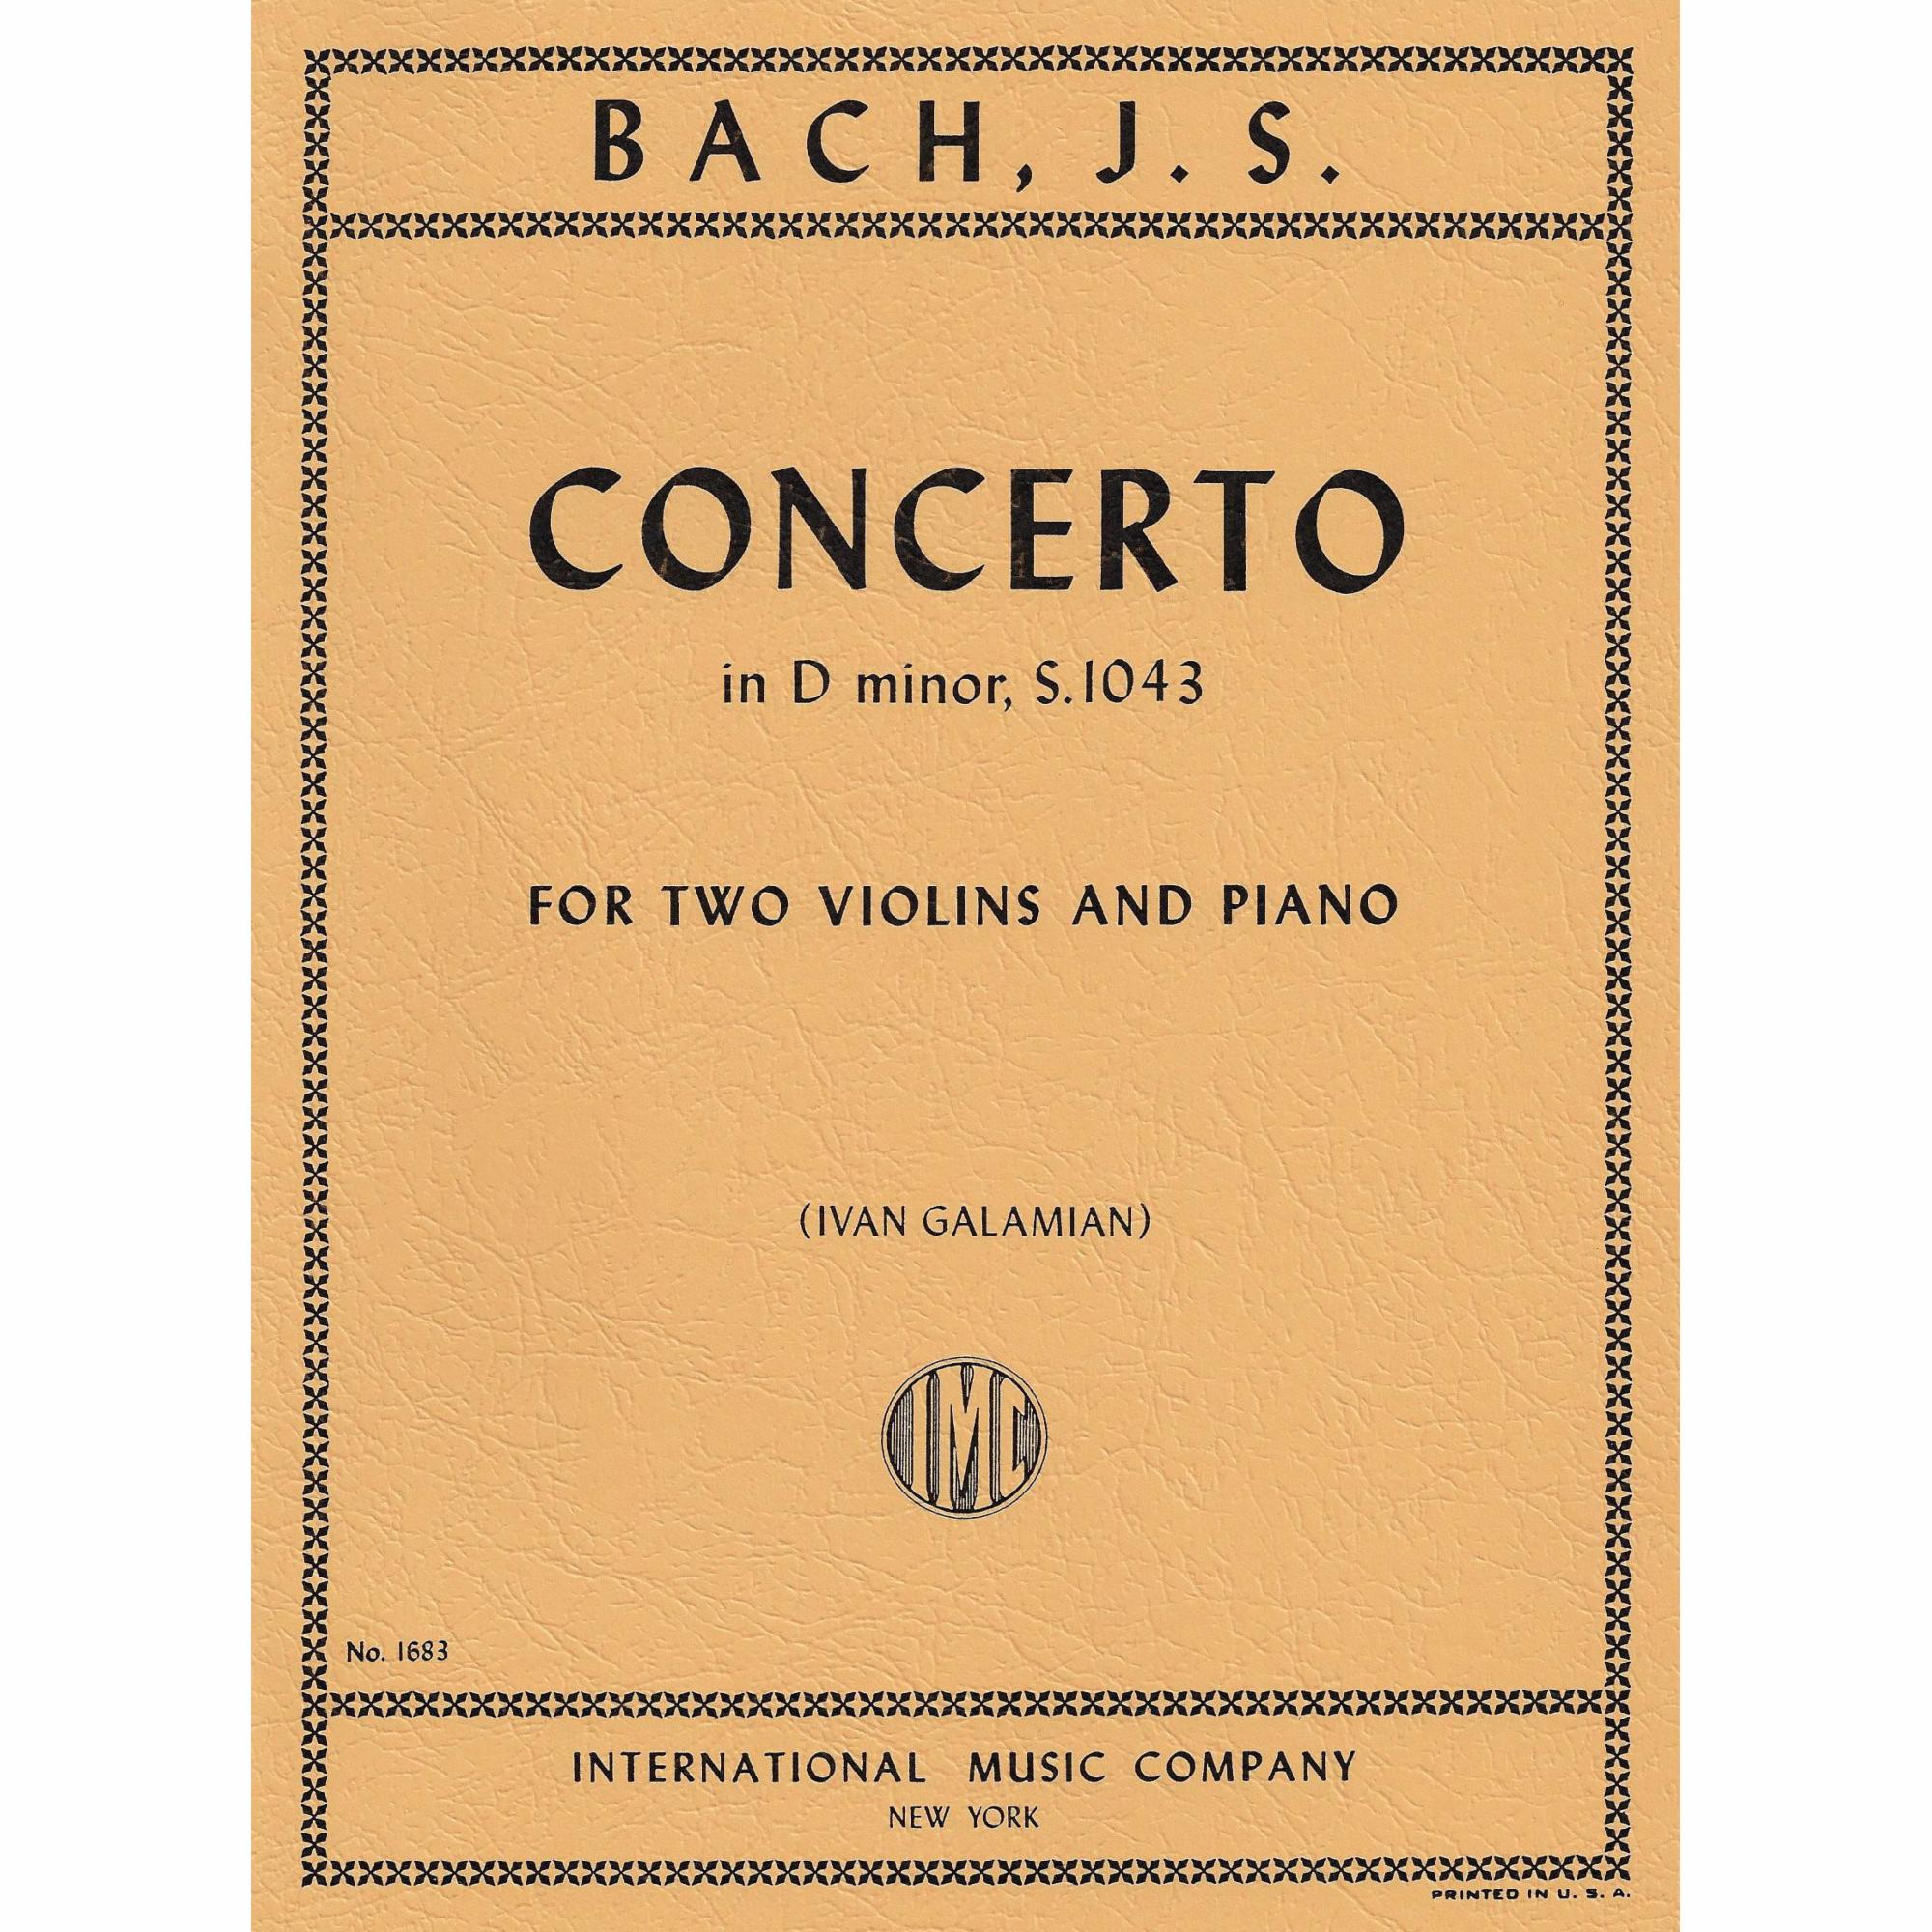 Bach -- Concerto in D Minor, S. 1043 for Two Violins and Piano